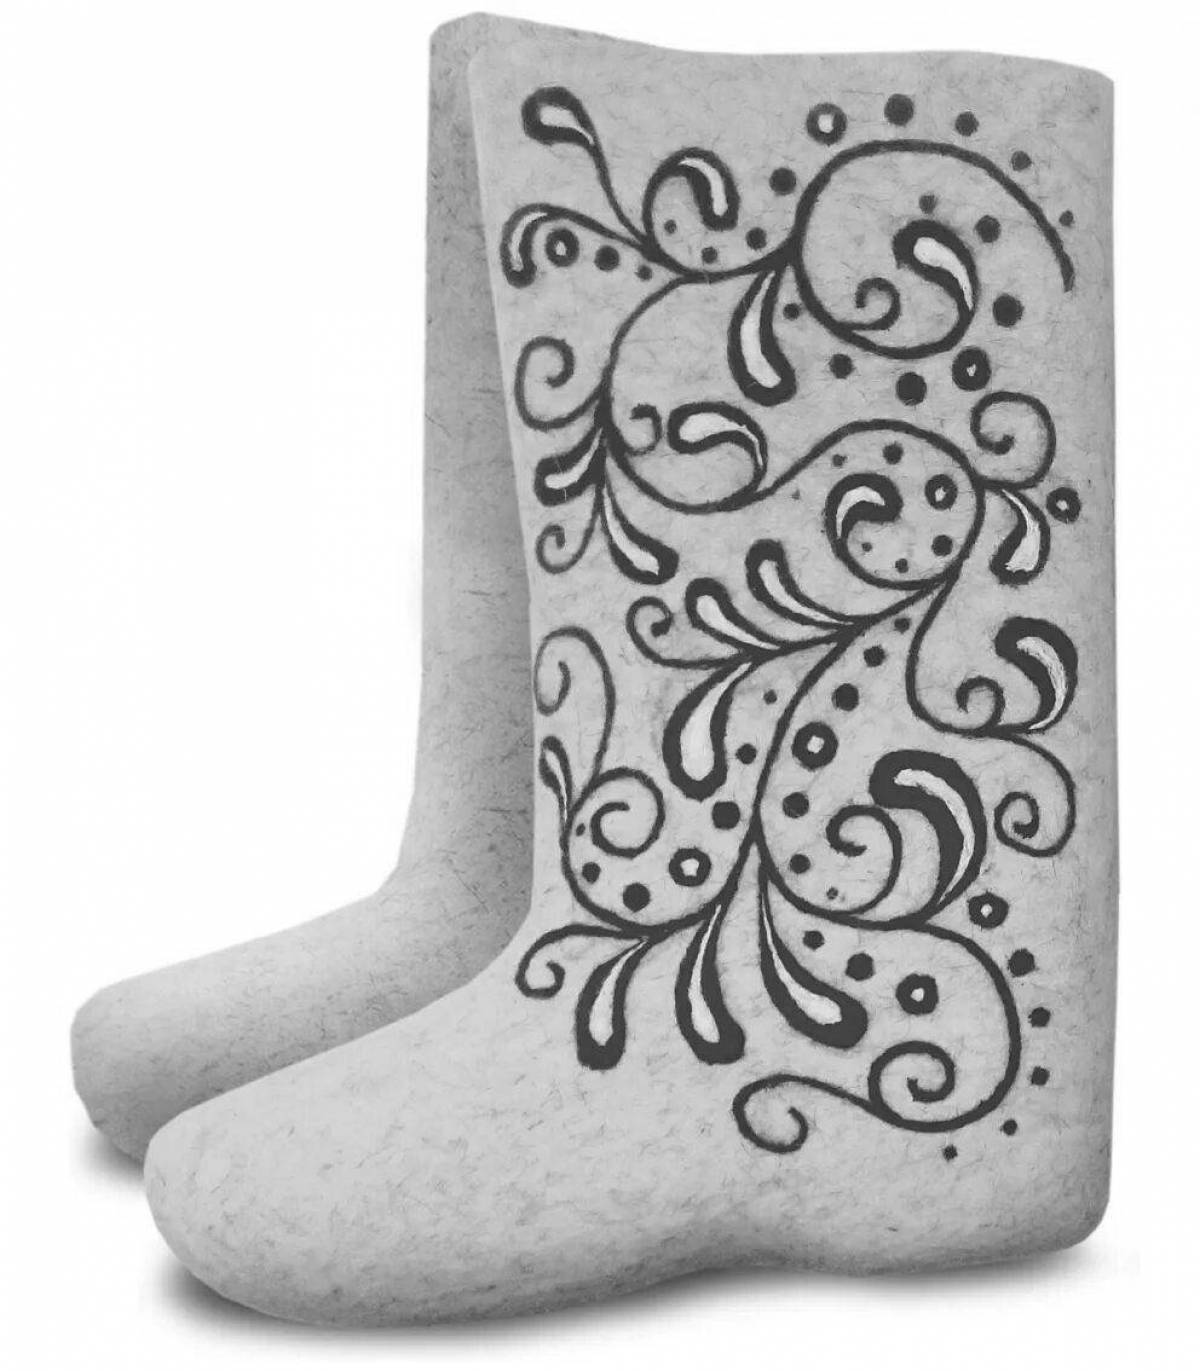 Exquisite patterned boots